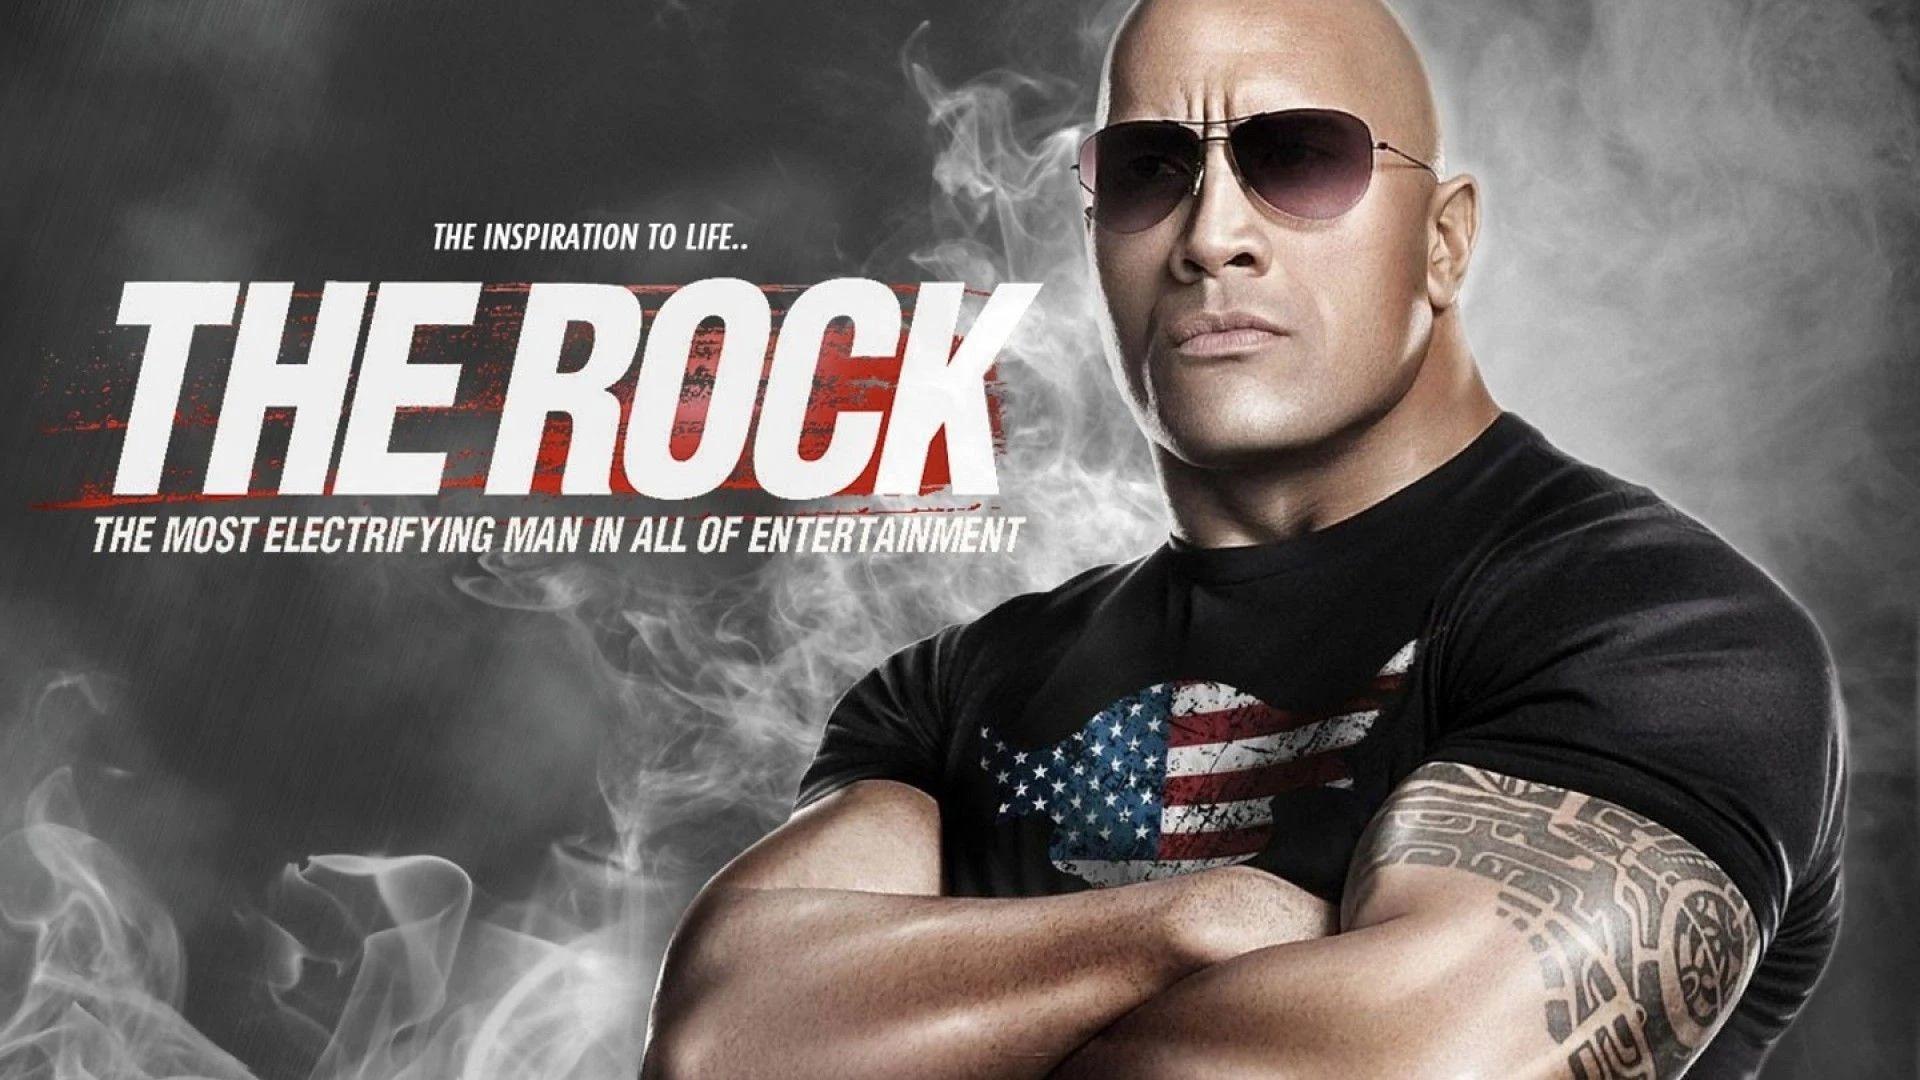 THE INSPIRATION TO LIFE..
THE ROCK
THE MOST ELECTRIFYING MAN IN ALL OF ENTERTAINMENT
JU